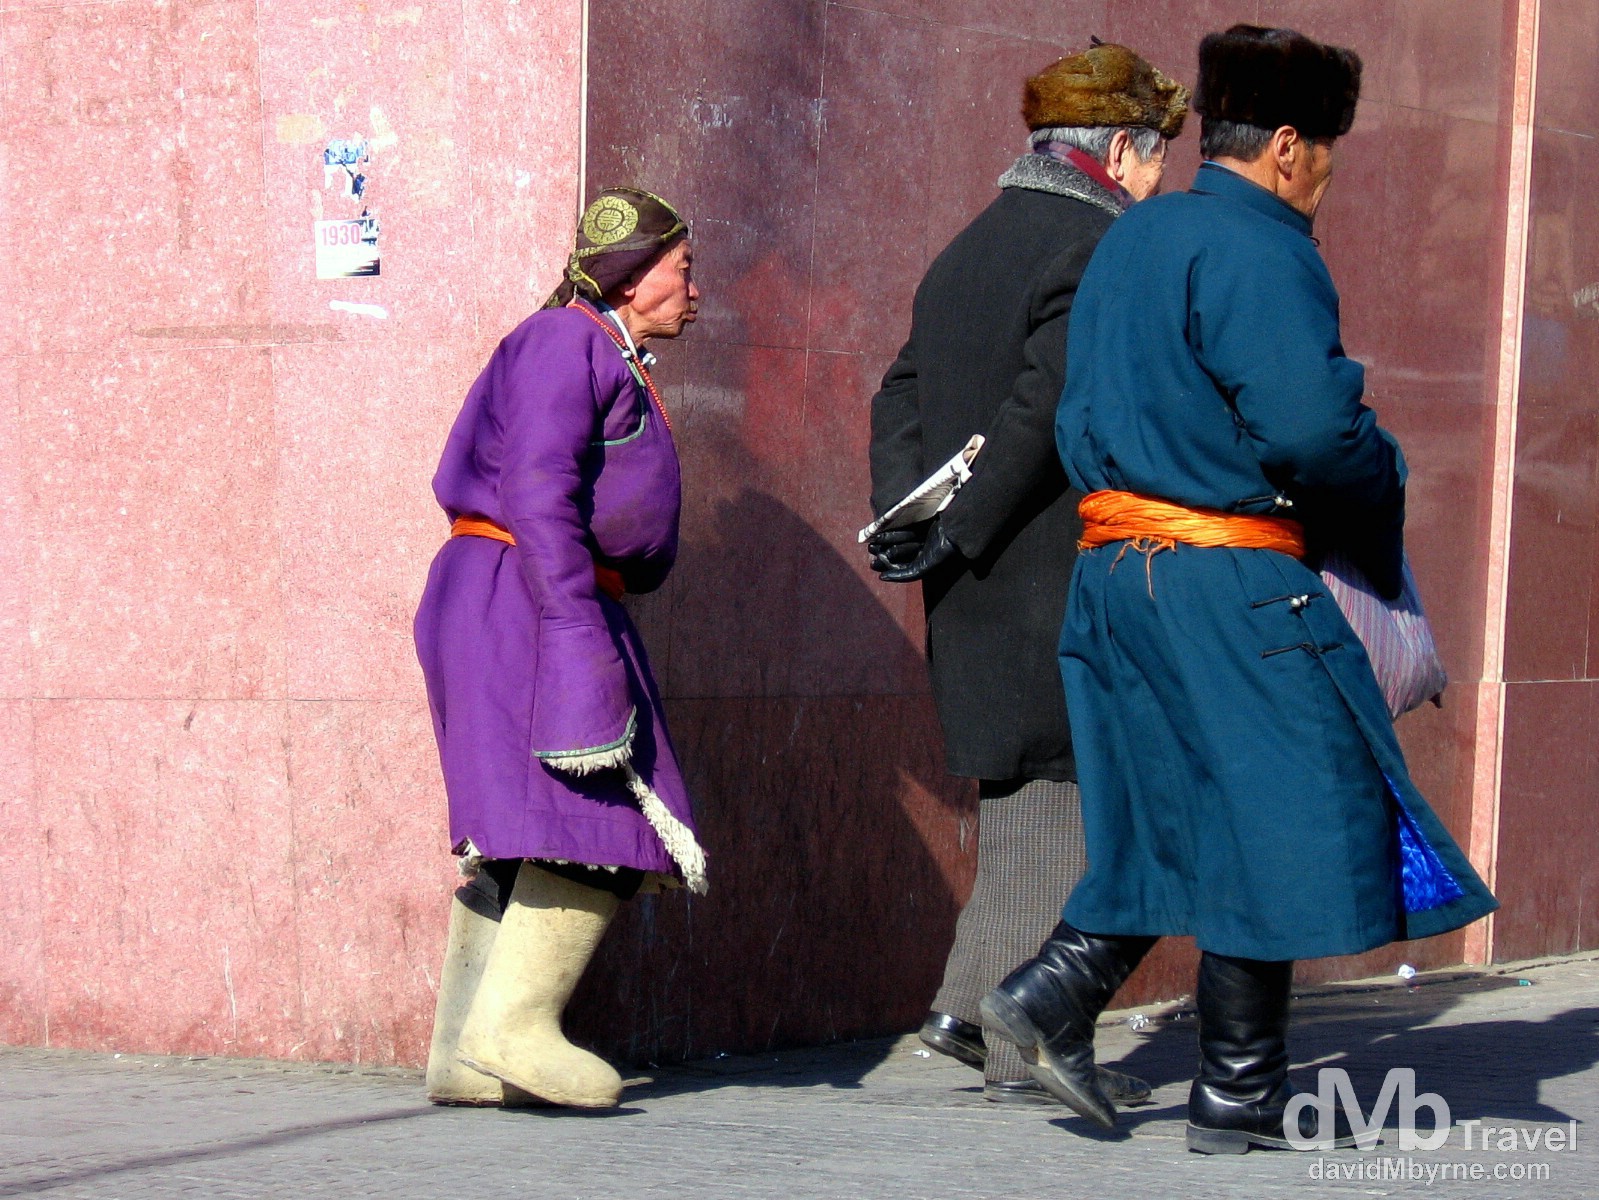 Locals walking the freezing cold streets of Ulan Bator, Mongolia. February 16, 2006. 